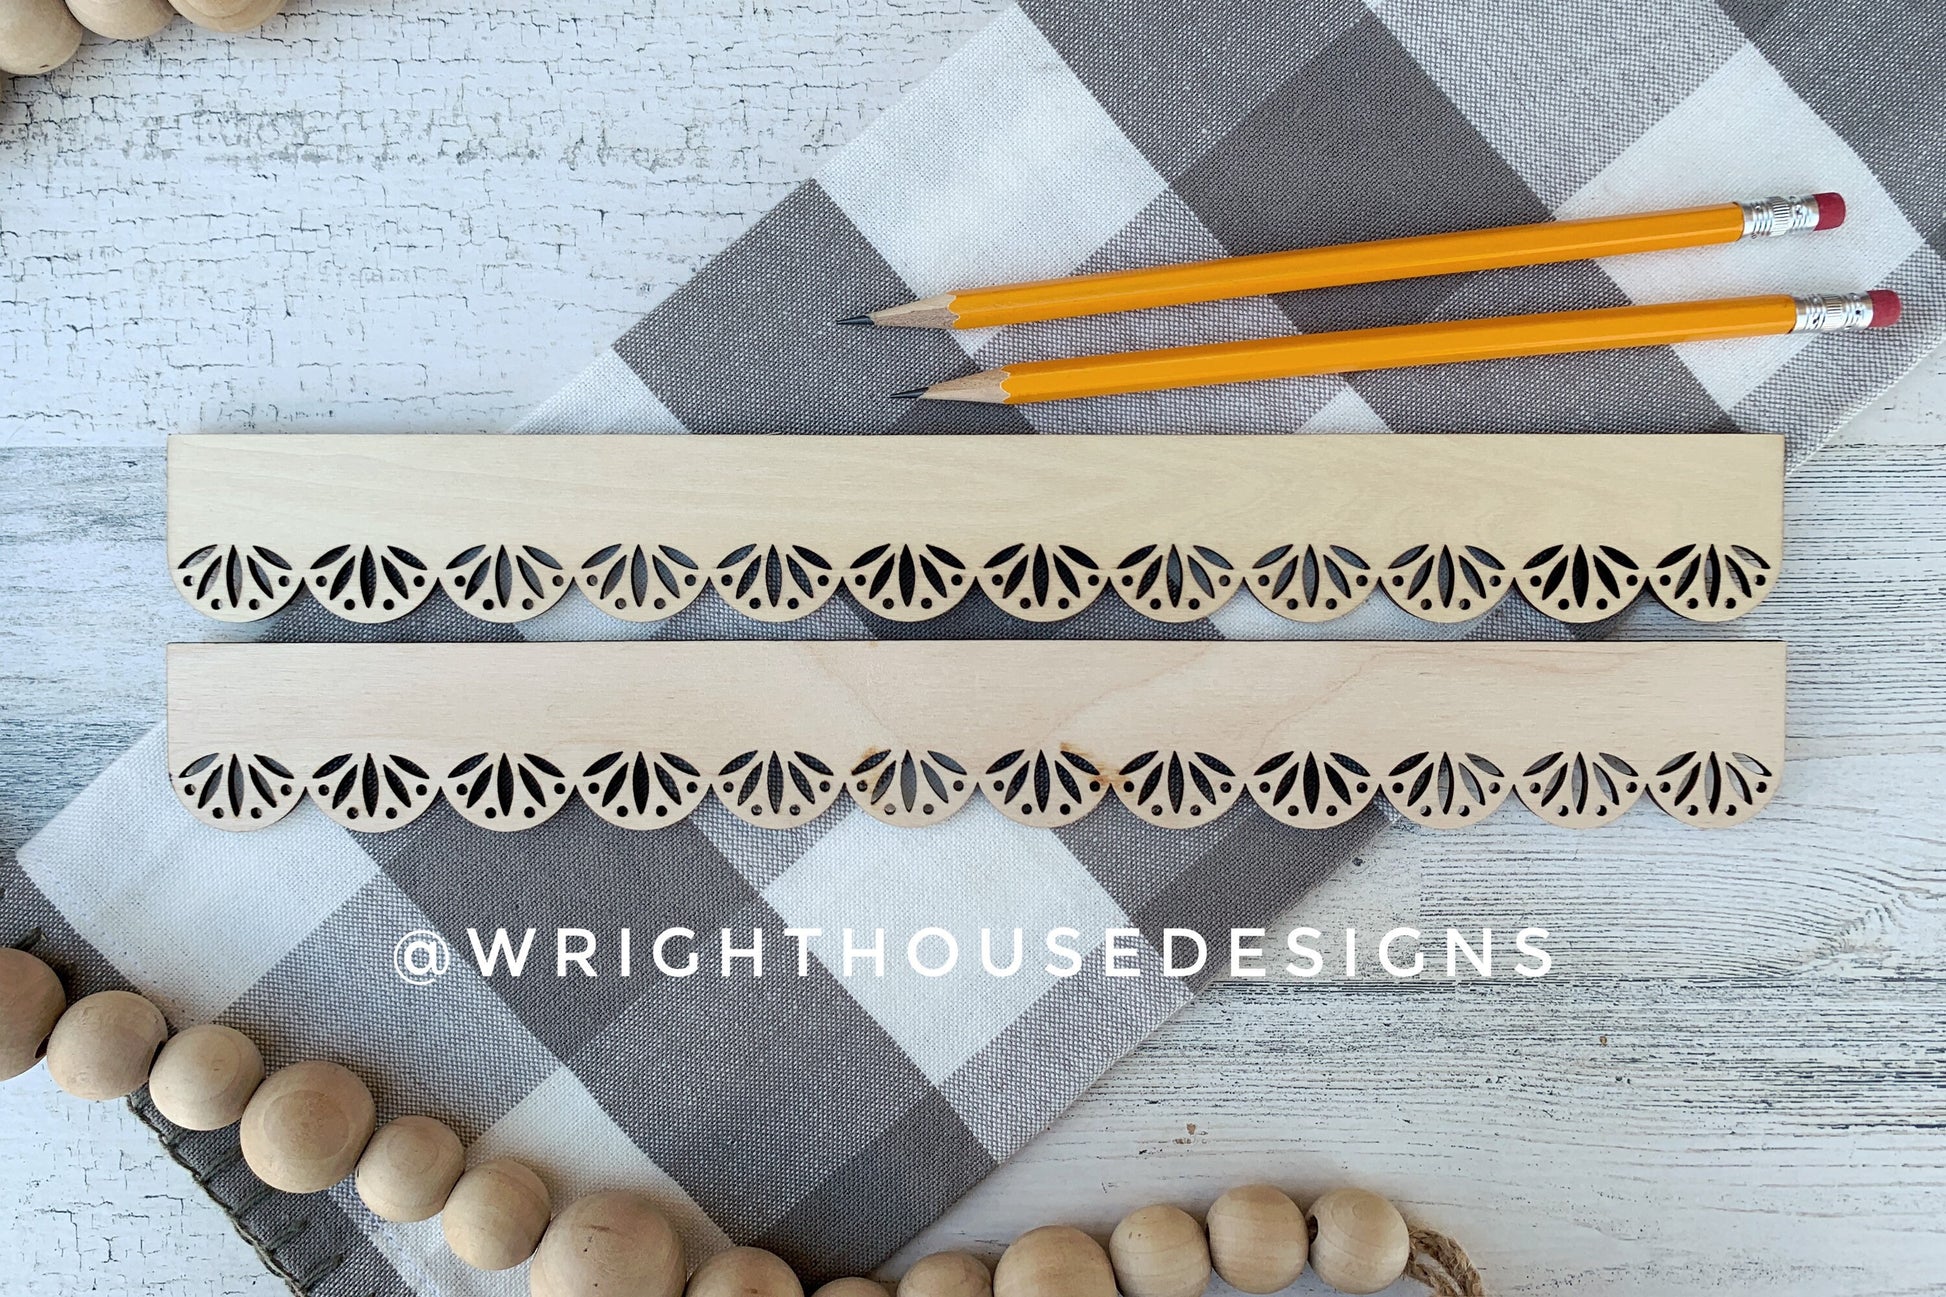 Wooden Laser Engraved Standard Ruler - Decorative Scallop Pattern - Personalized School and Office Supplies - Custom Logo Monogram